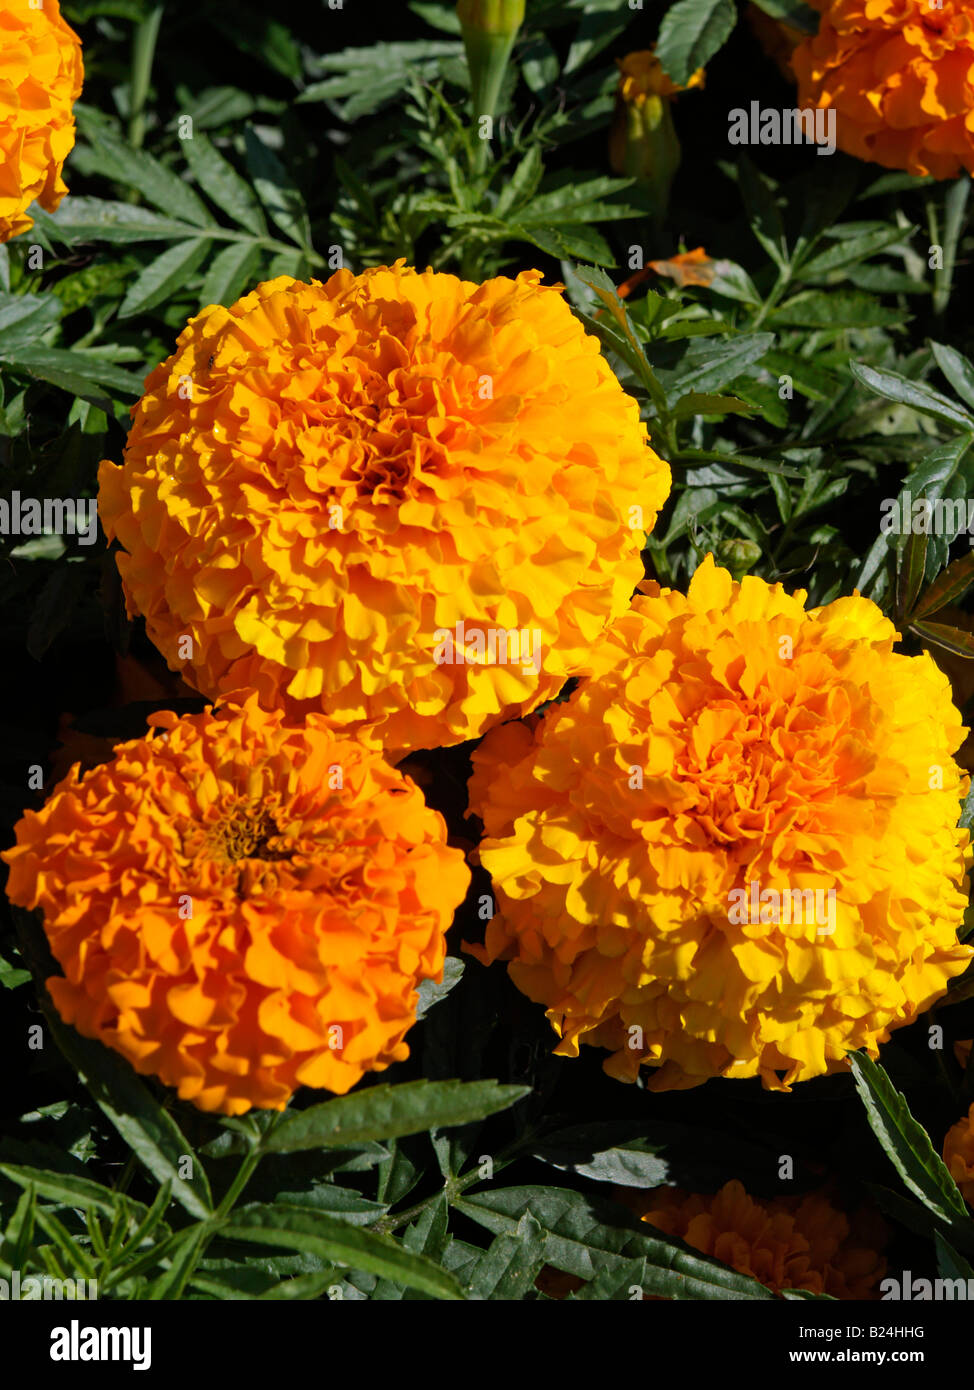 Tagetes erecta 'Crackerjack Mixed' (African marigold) Close up of two orangy yellow flowers. Stock Photo